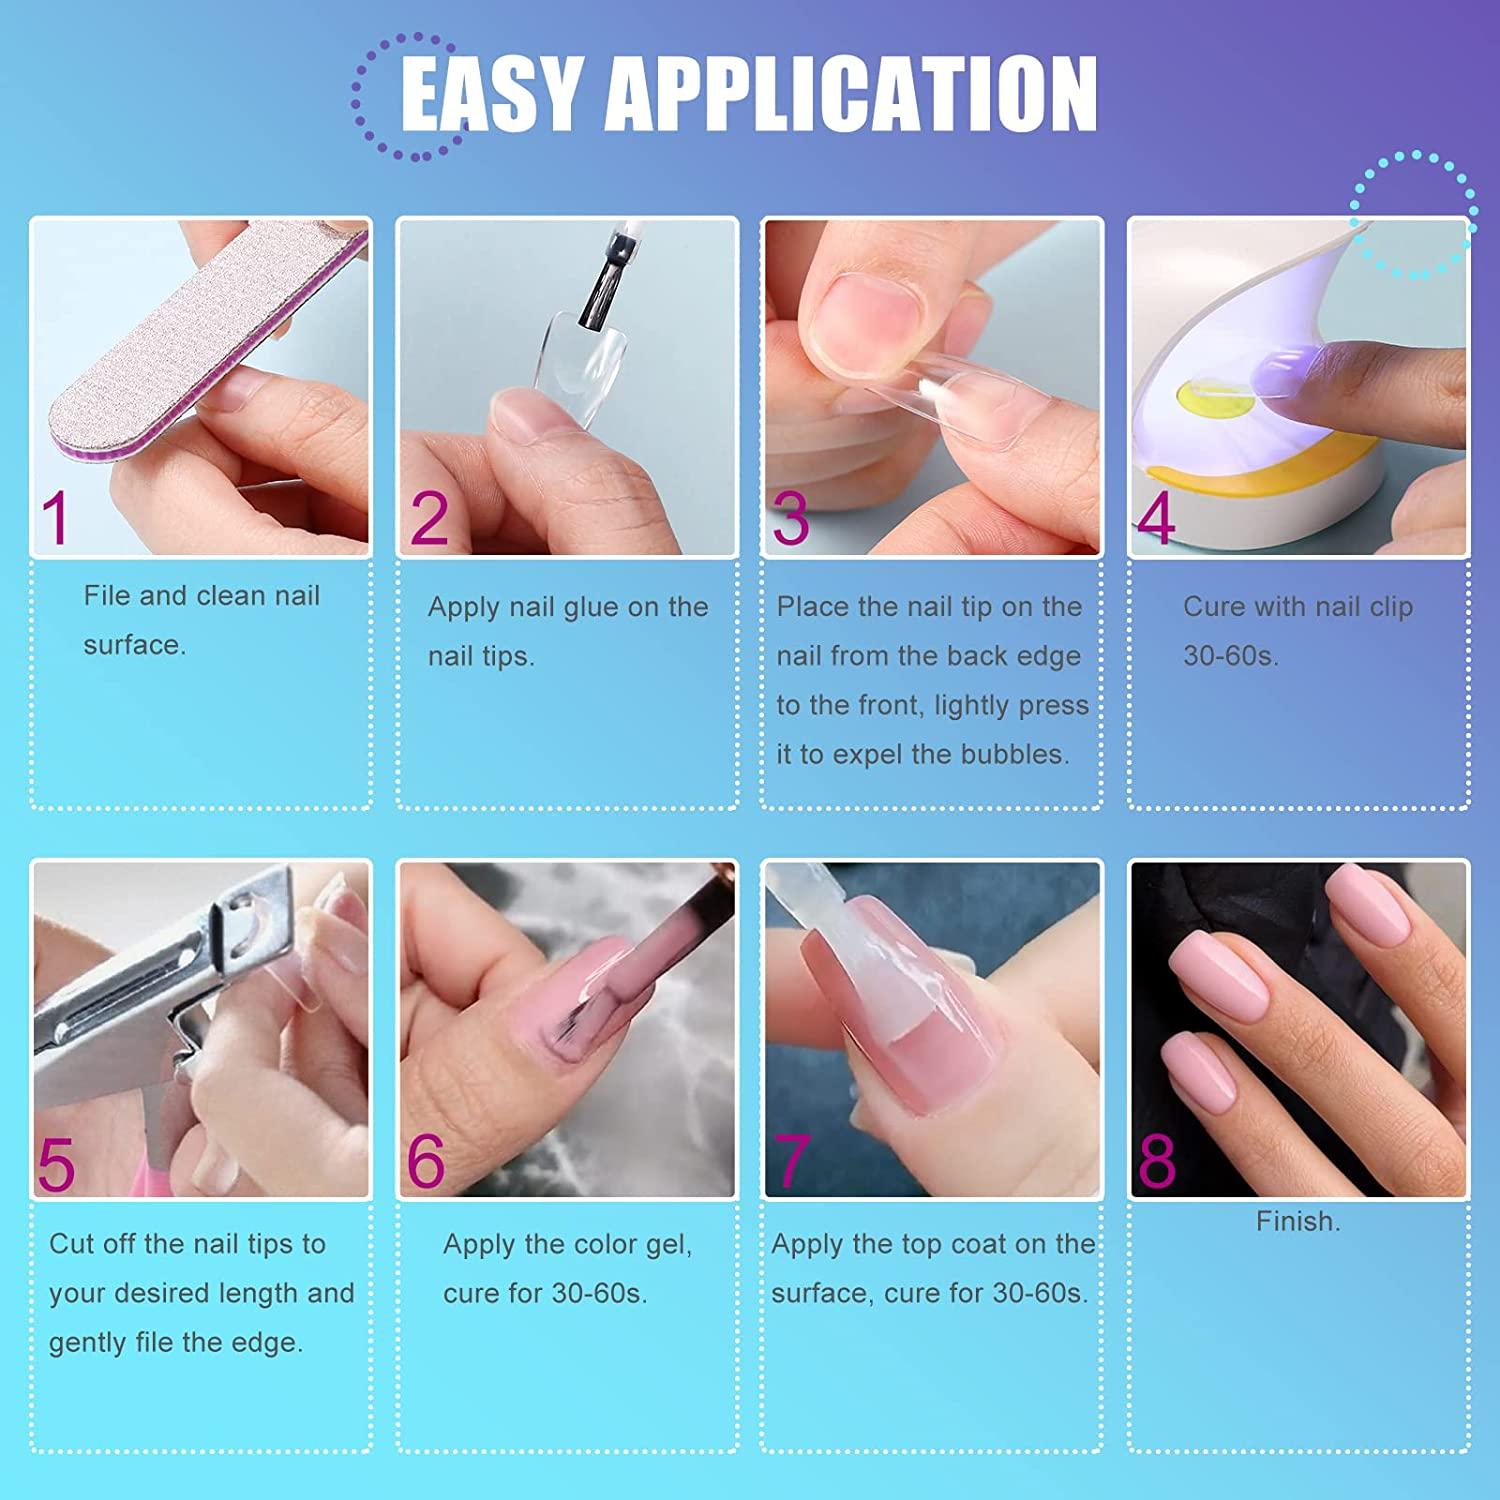 How To Remove Gel Nails At Home In 5 Easy Steps | First For Women